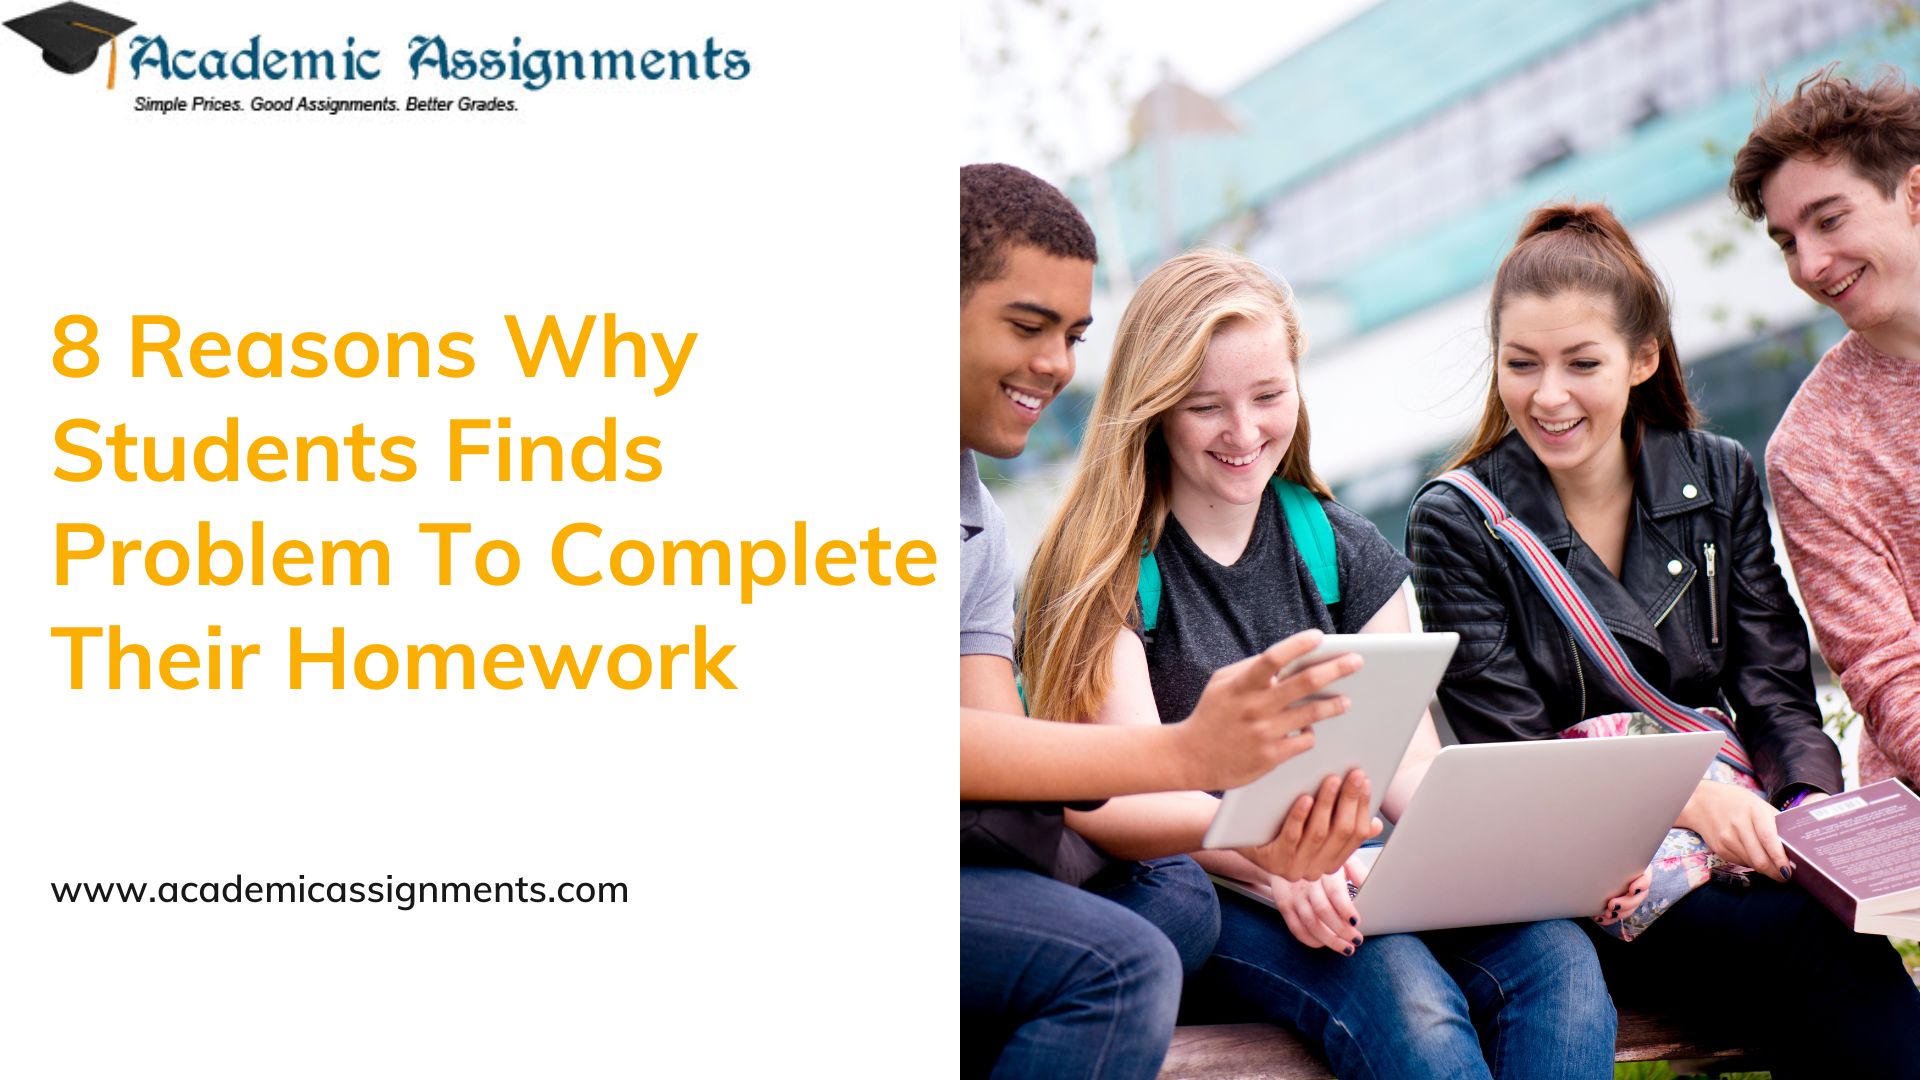 8 Reasons Why Students Finds Problem To Complete Their Homework